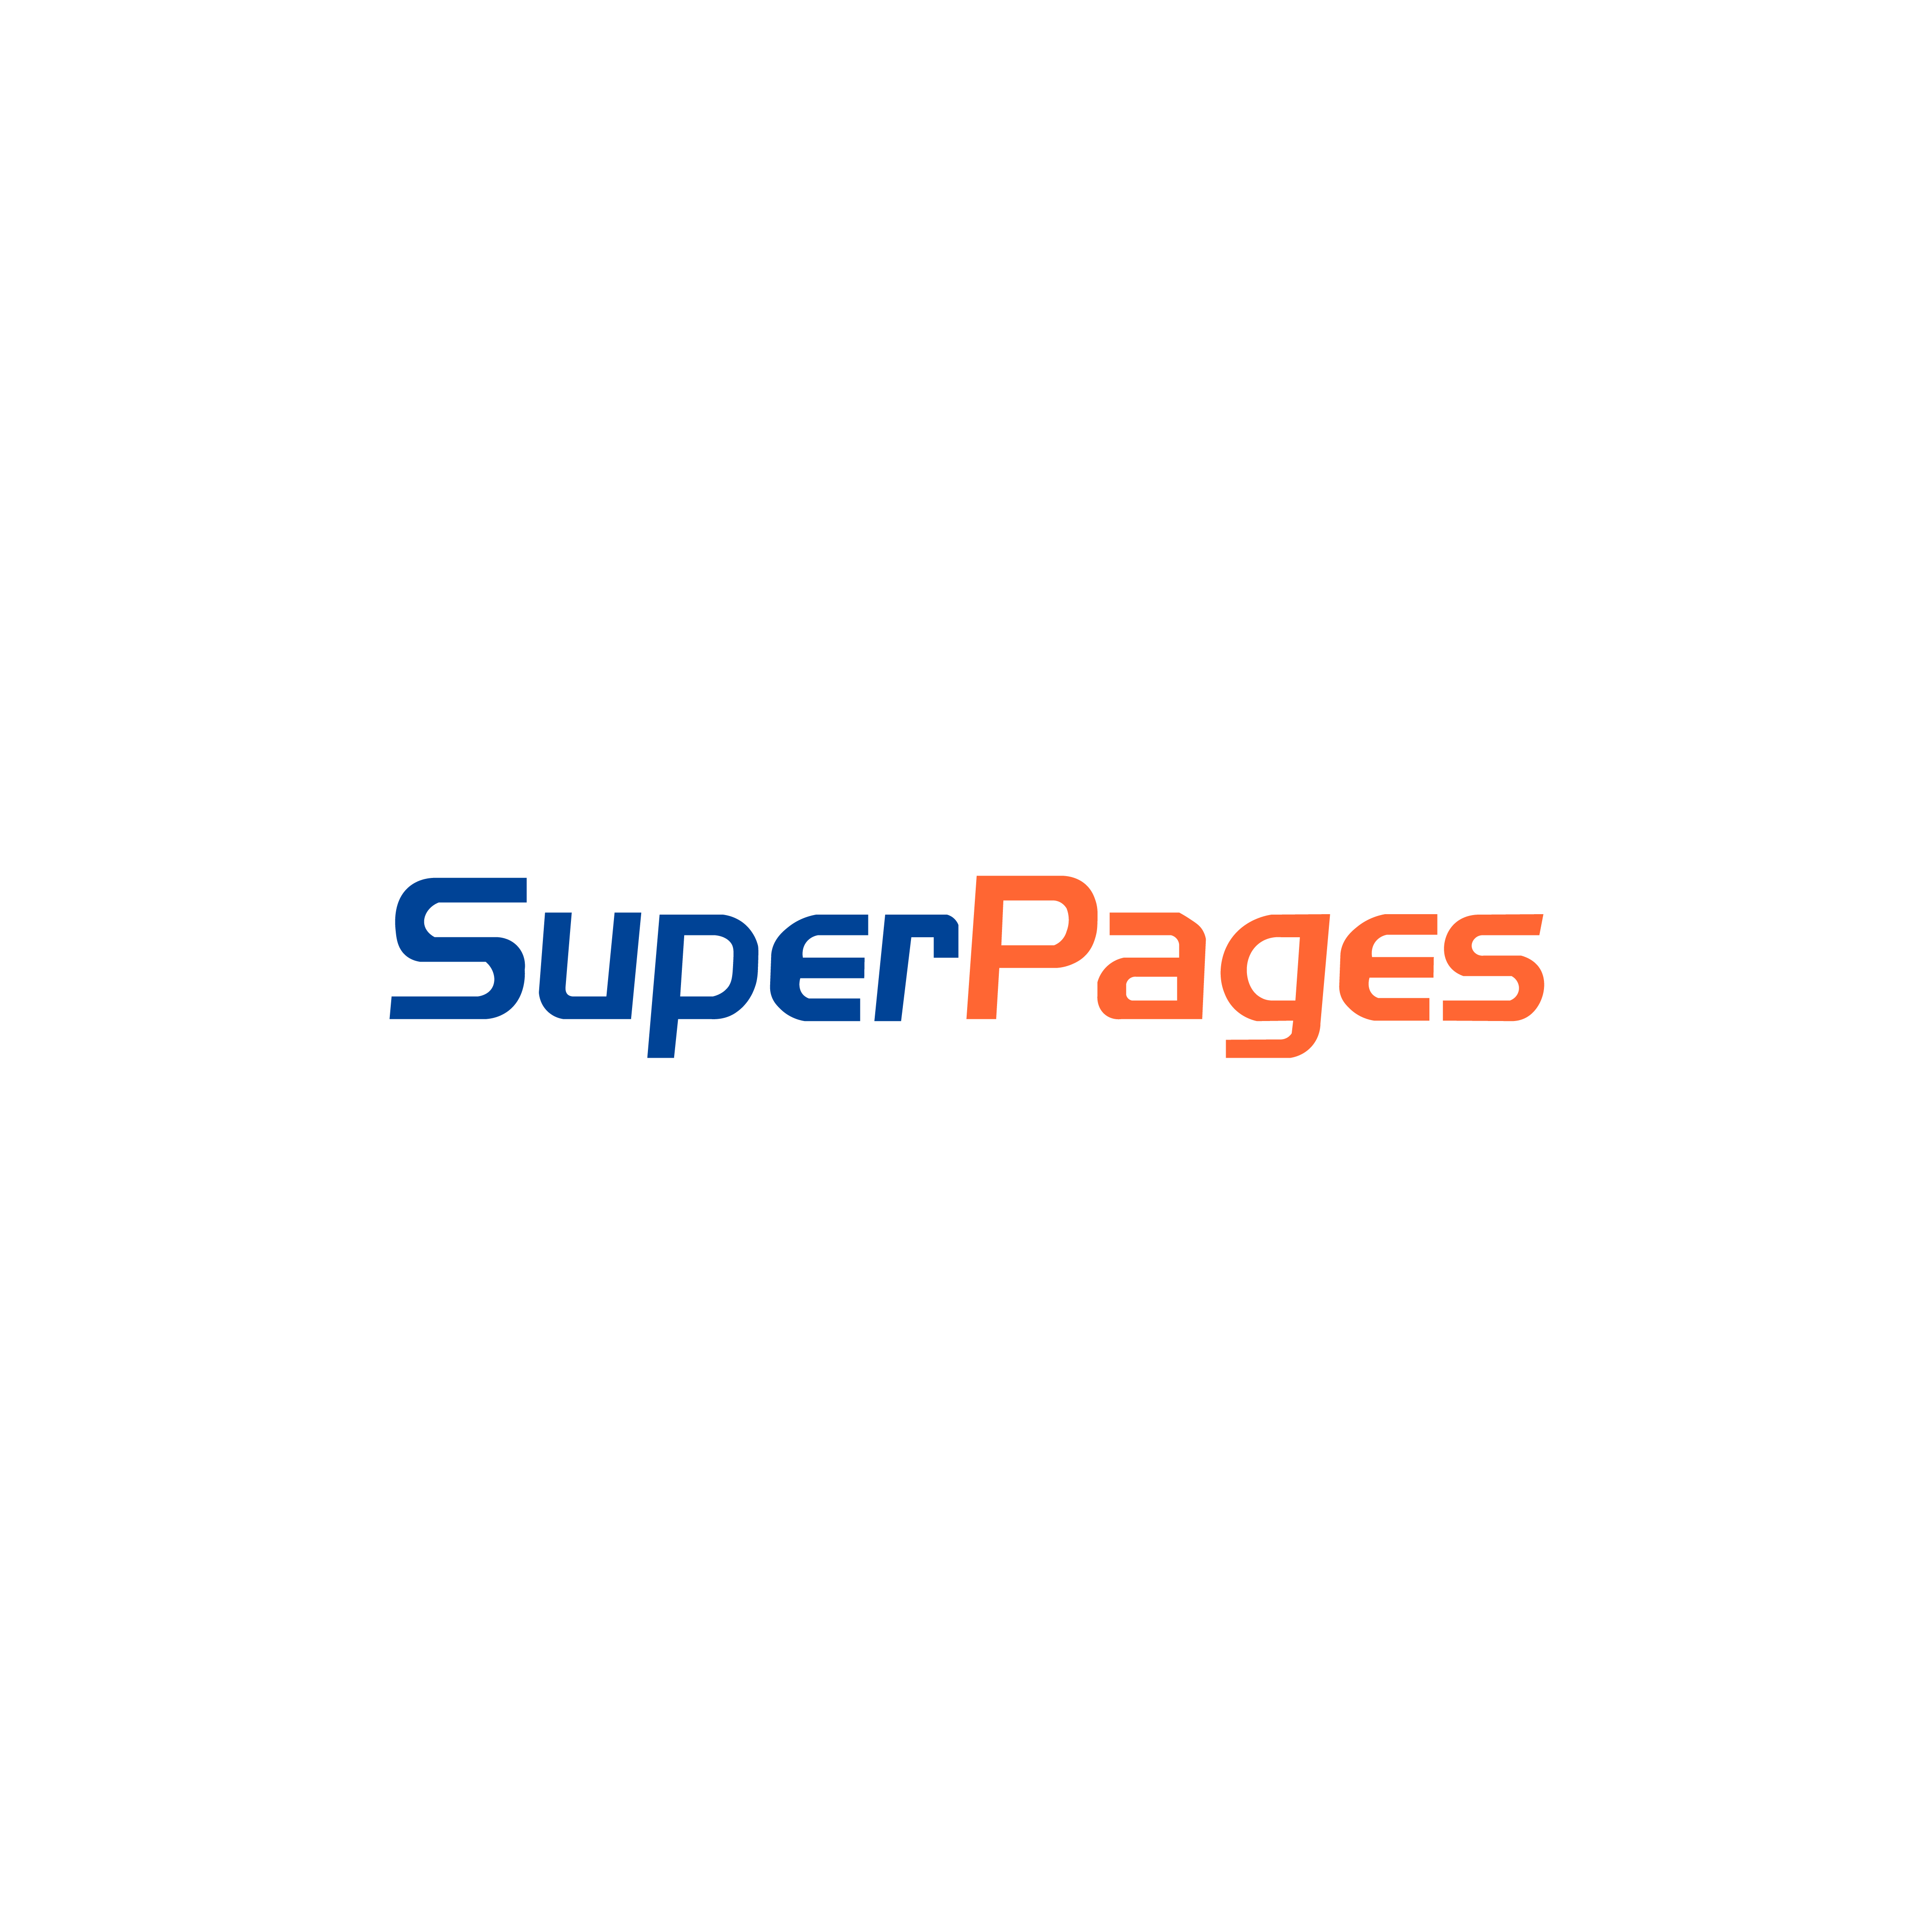 Brothers Locksmith - Superpages